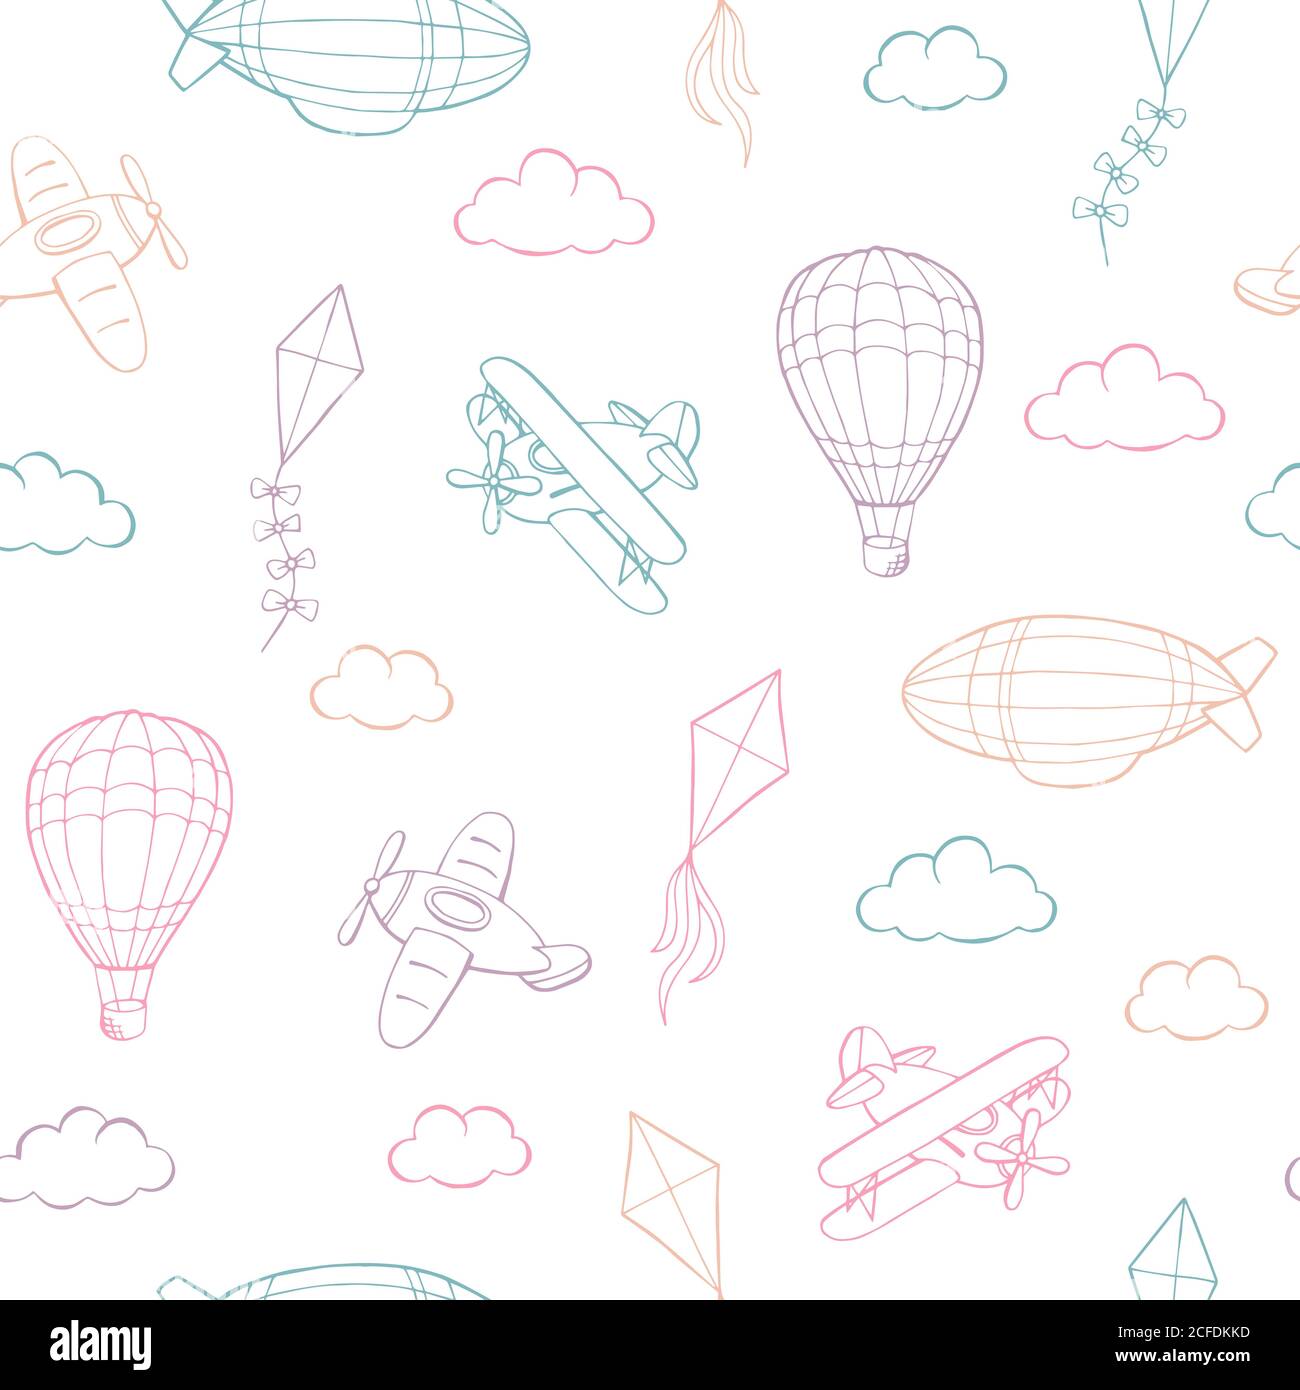 Flying airplane balloon kite cloud graphic color sketch seamless pattern illustration vector Stock Vector